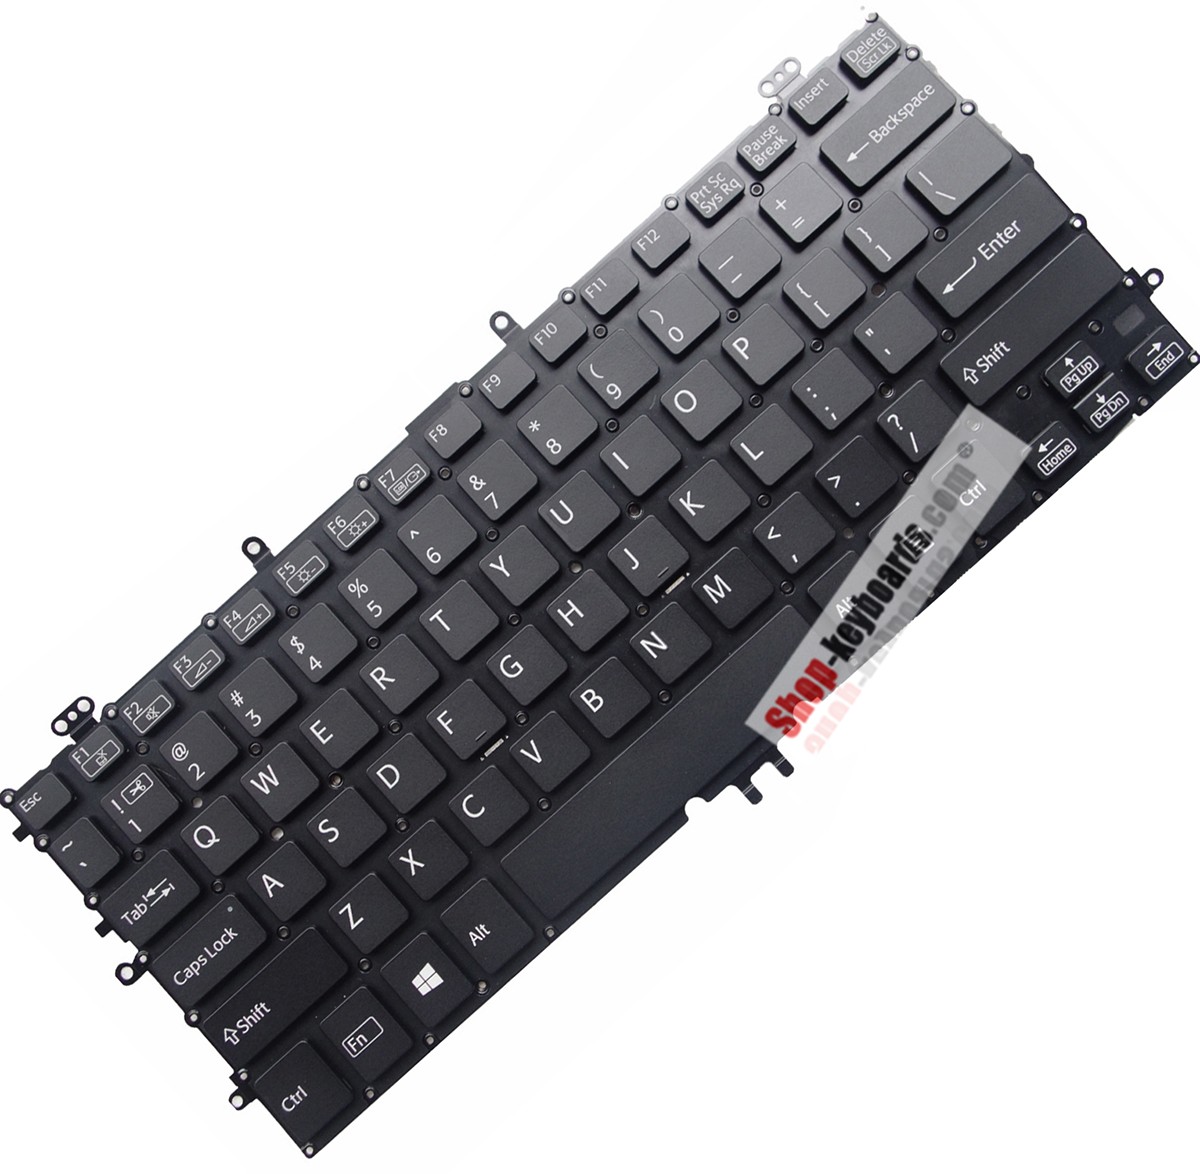 Sony VAIO SVF11N1S2EB  Keyboard replacement